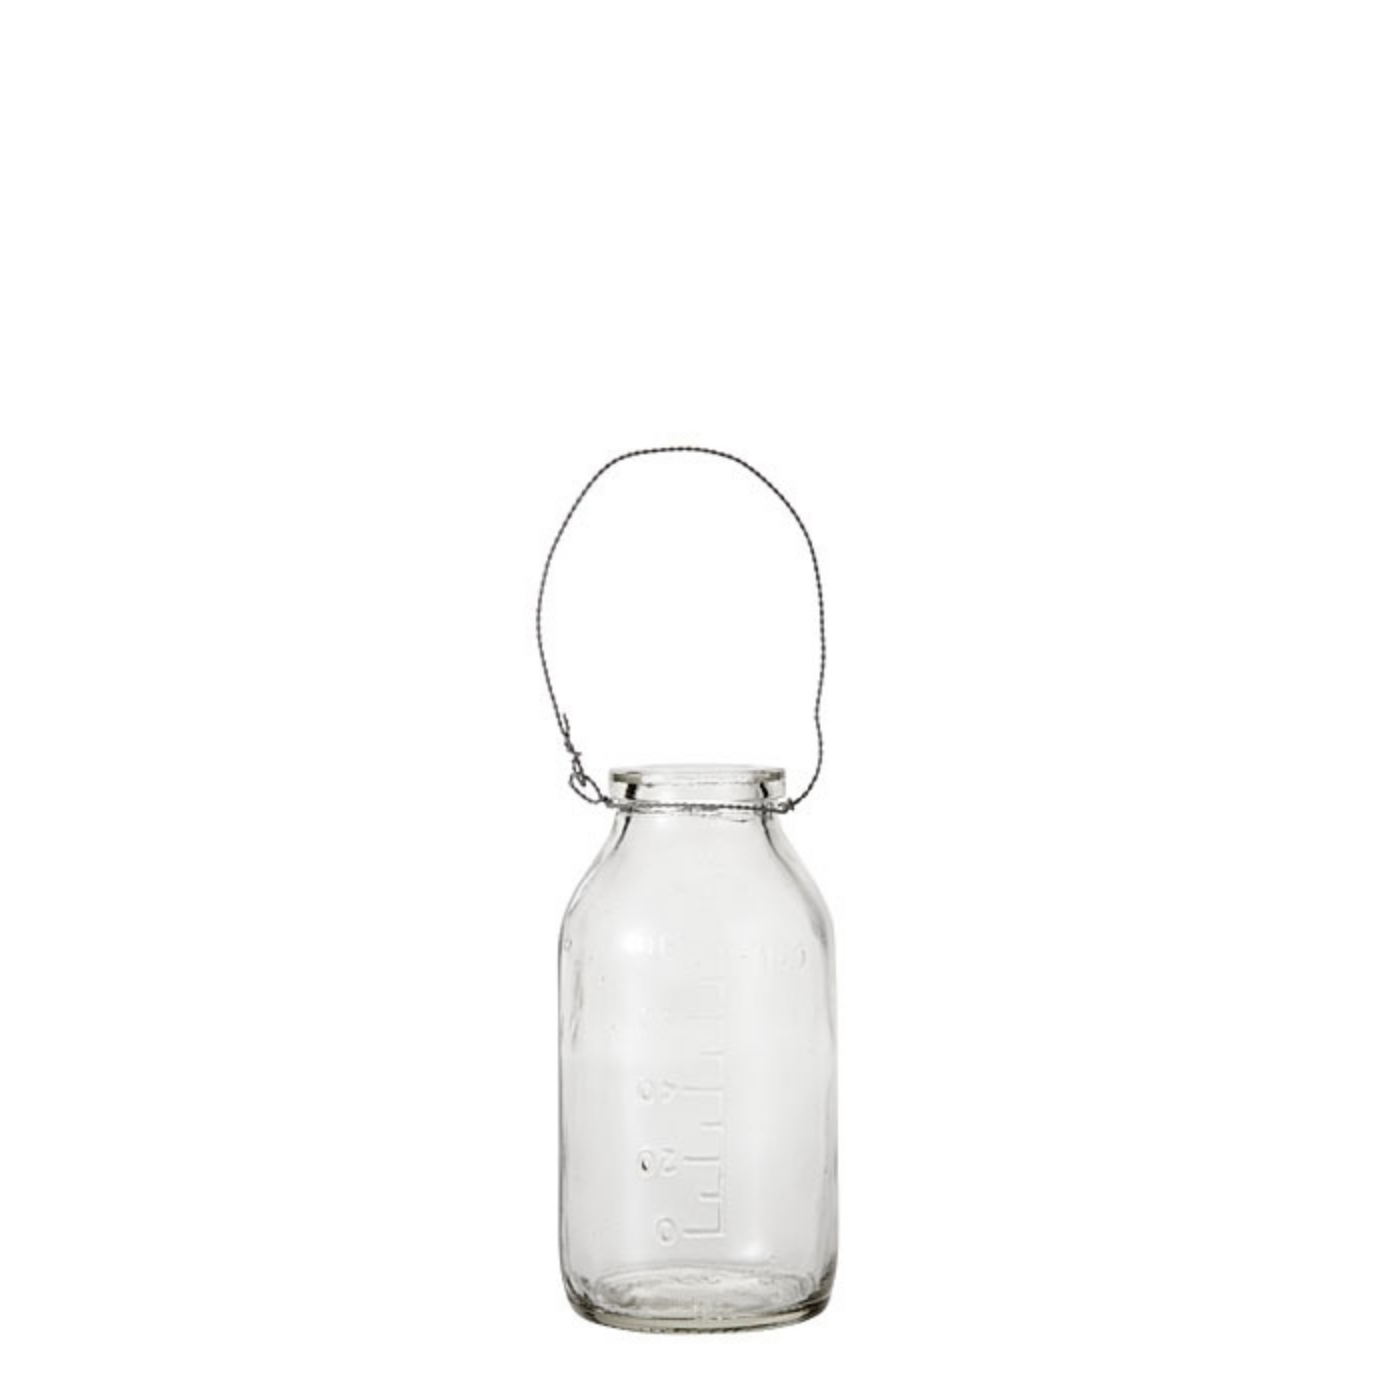 100ml Bottle with Wire Handle